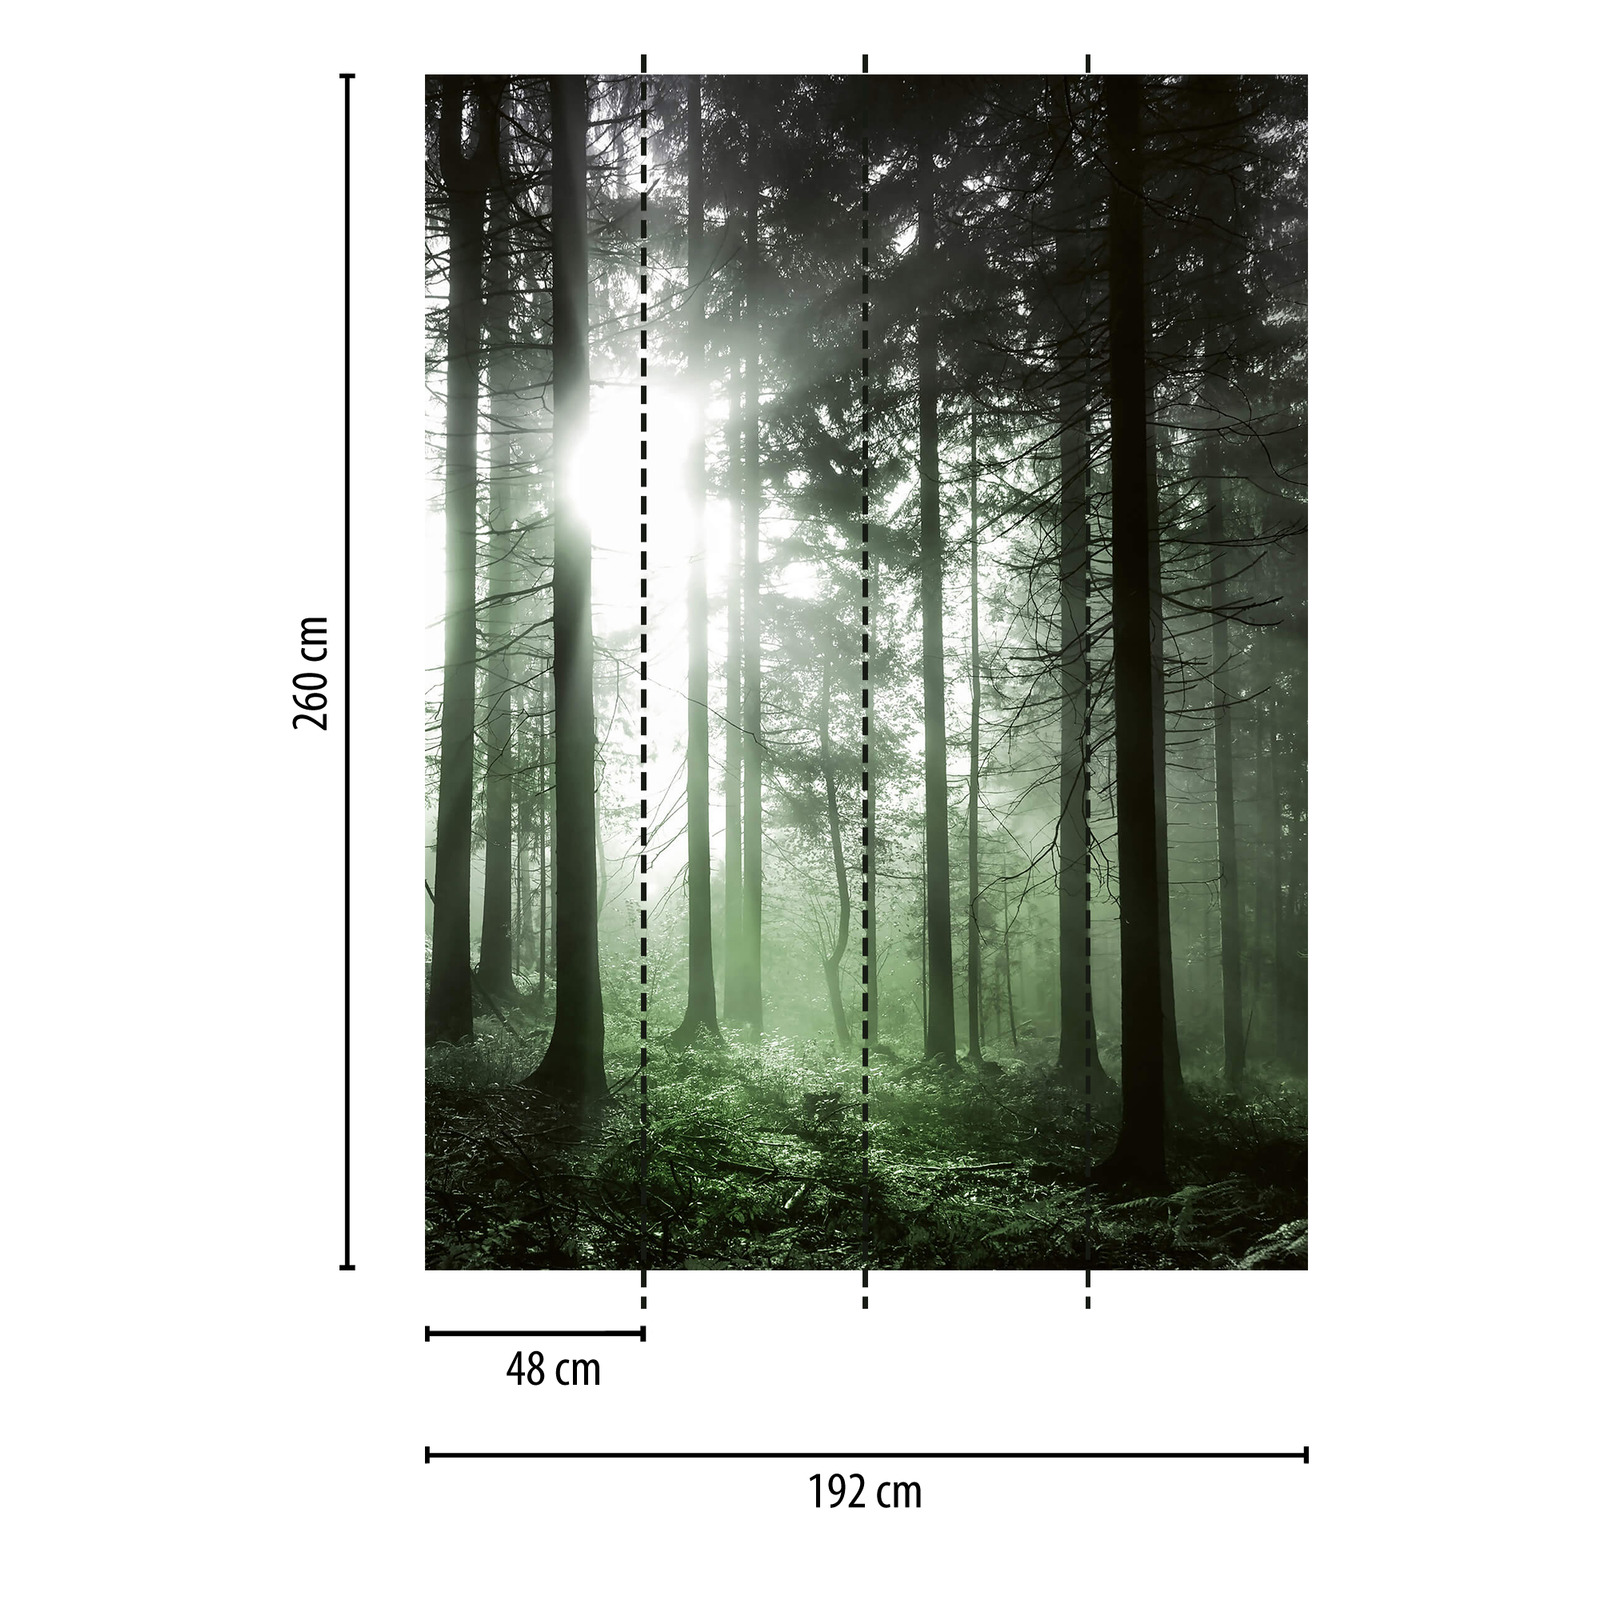             Photo wallpaper sunbeams in the forest - green, black, white
        